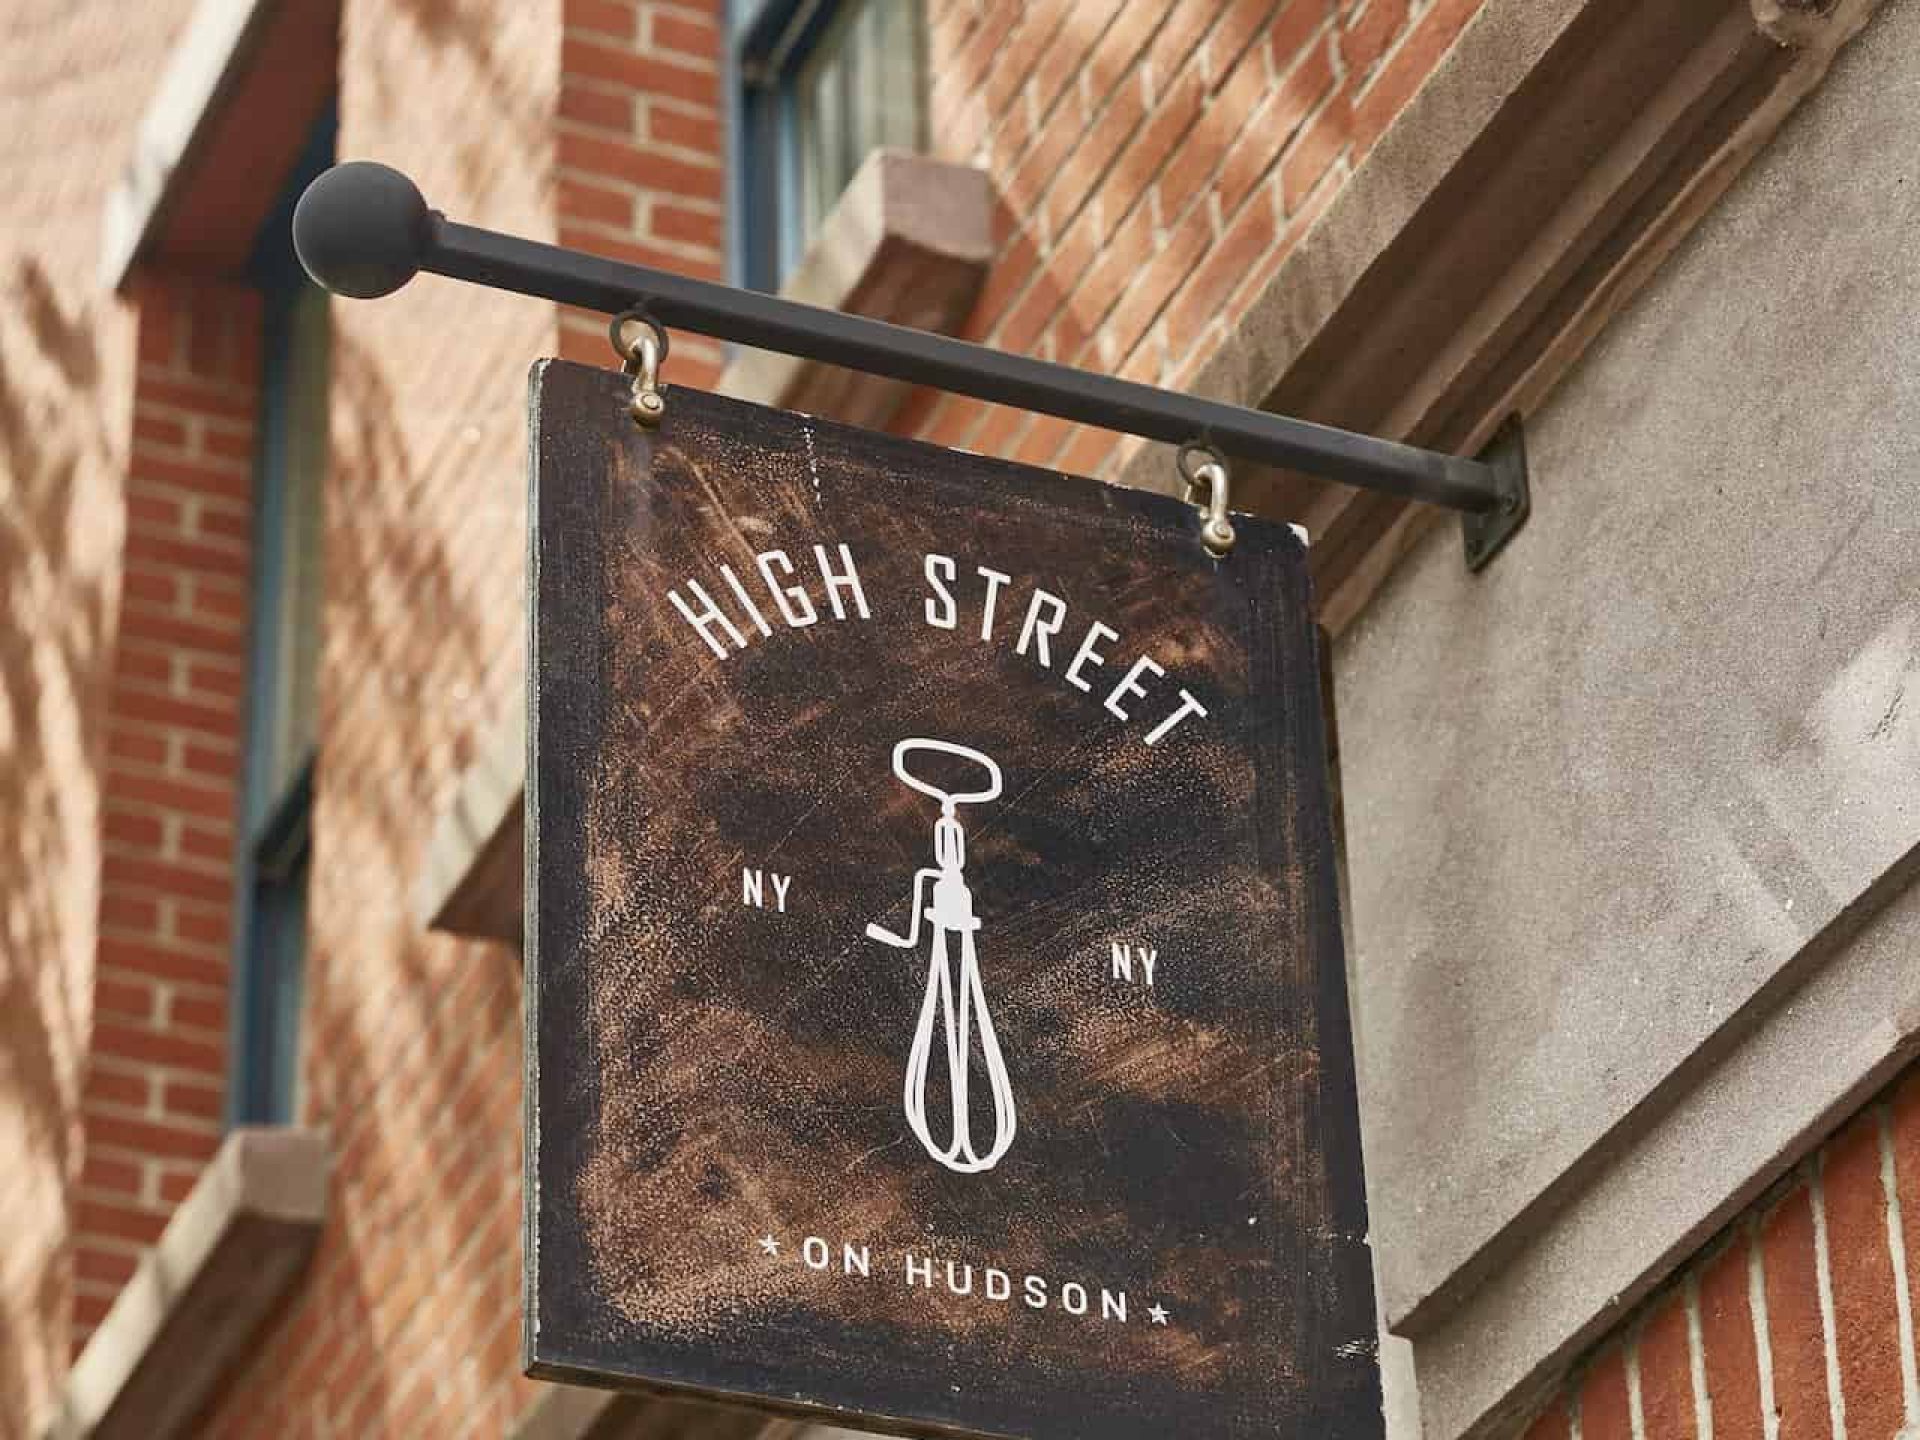 Close up of a hanging sign for High Street on Hudson restaurant in New York. Wood sign hanging from a metal post.